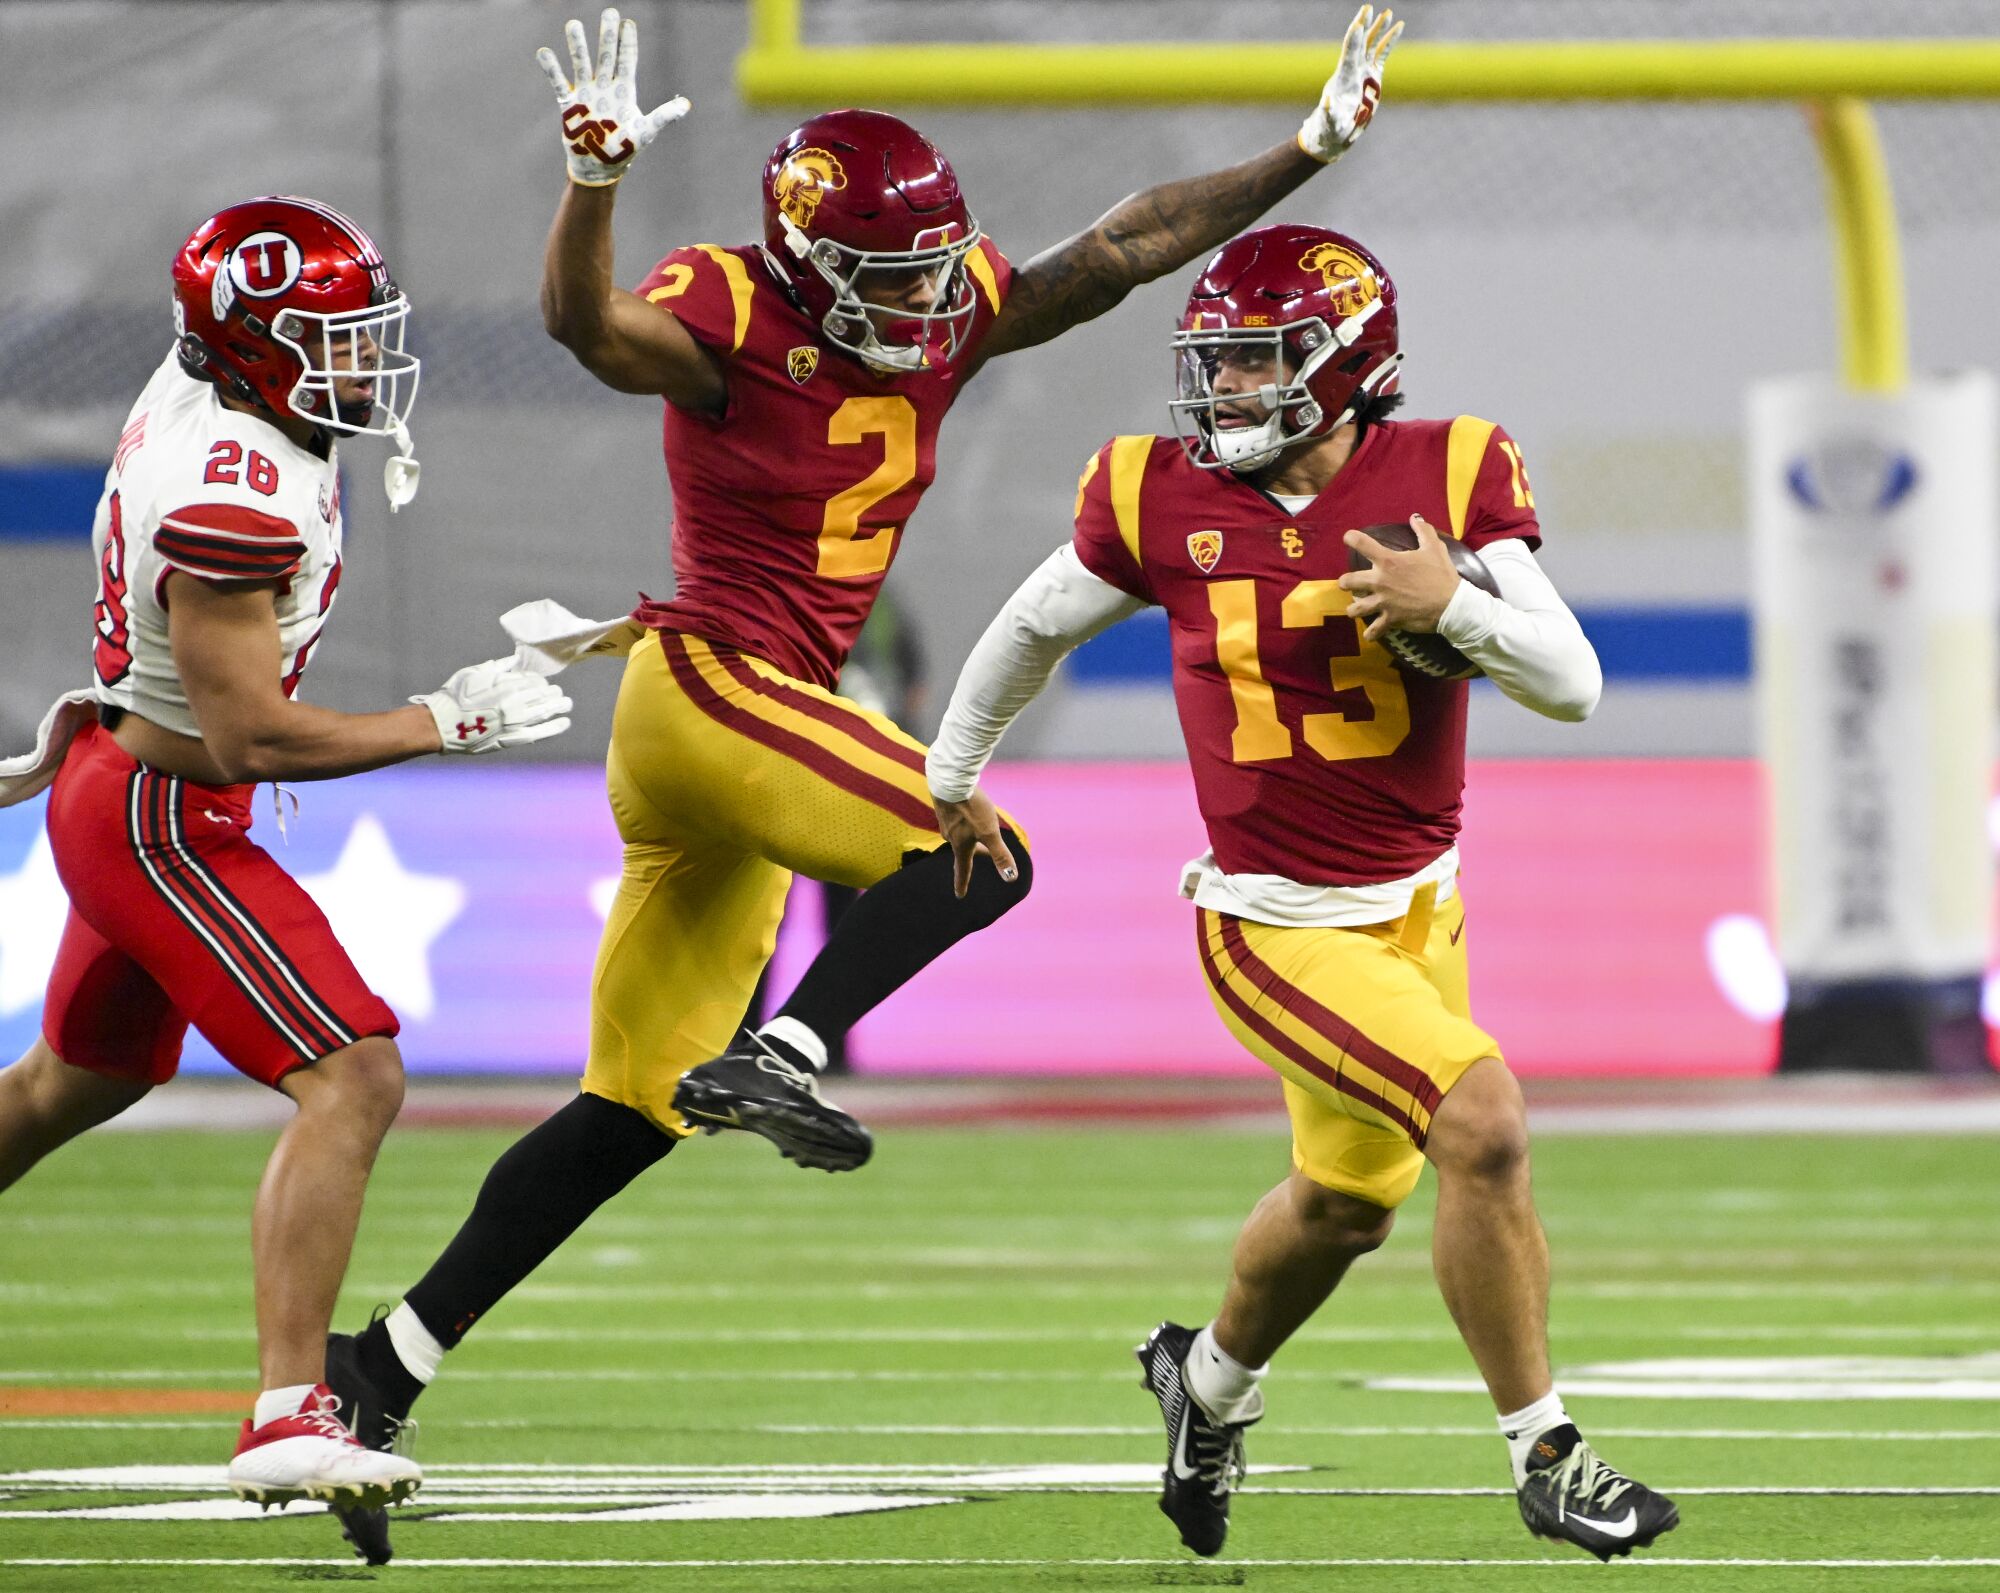 USC quarterback Caleb Williams runs with the football away from Utah safety Sione Vaki